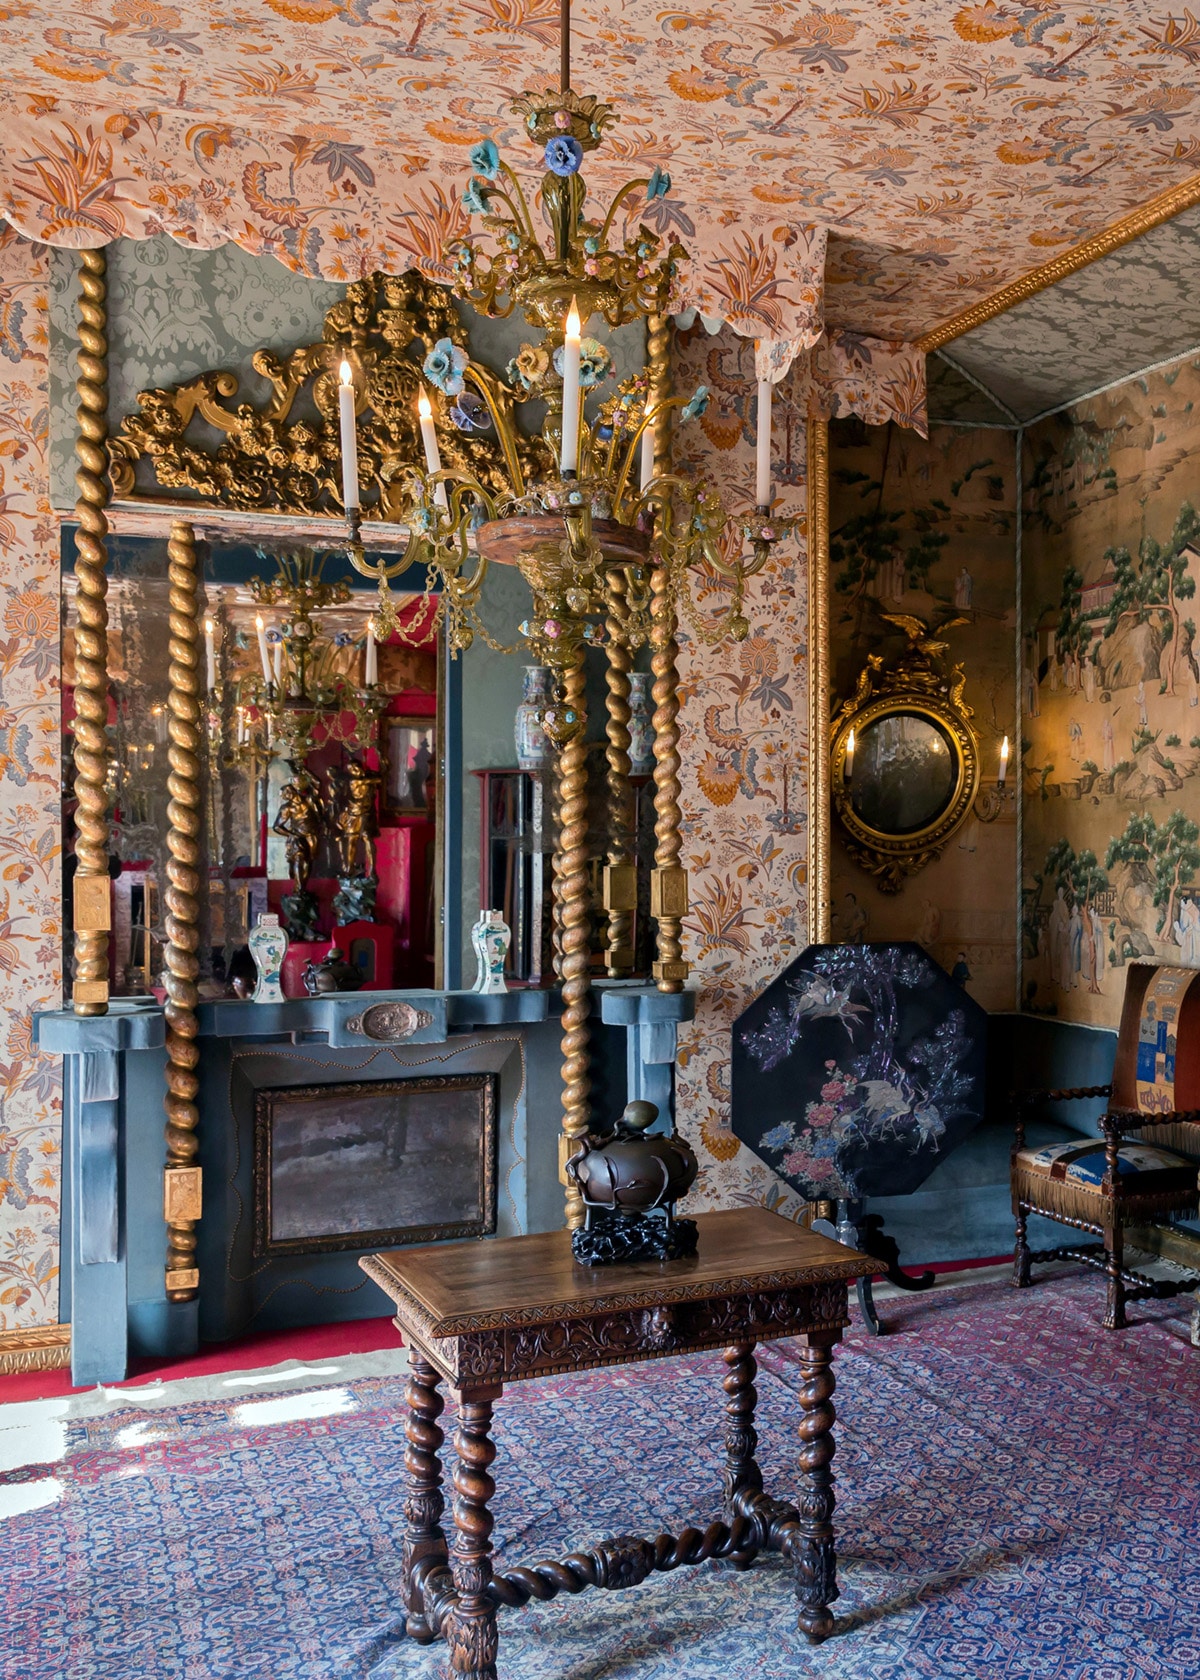 tapestry walls and eclectic decor at victor hugo's house in guernsey hauteville house